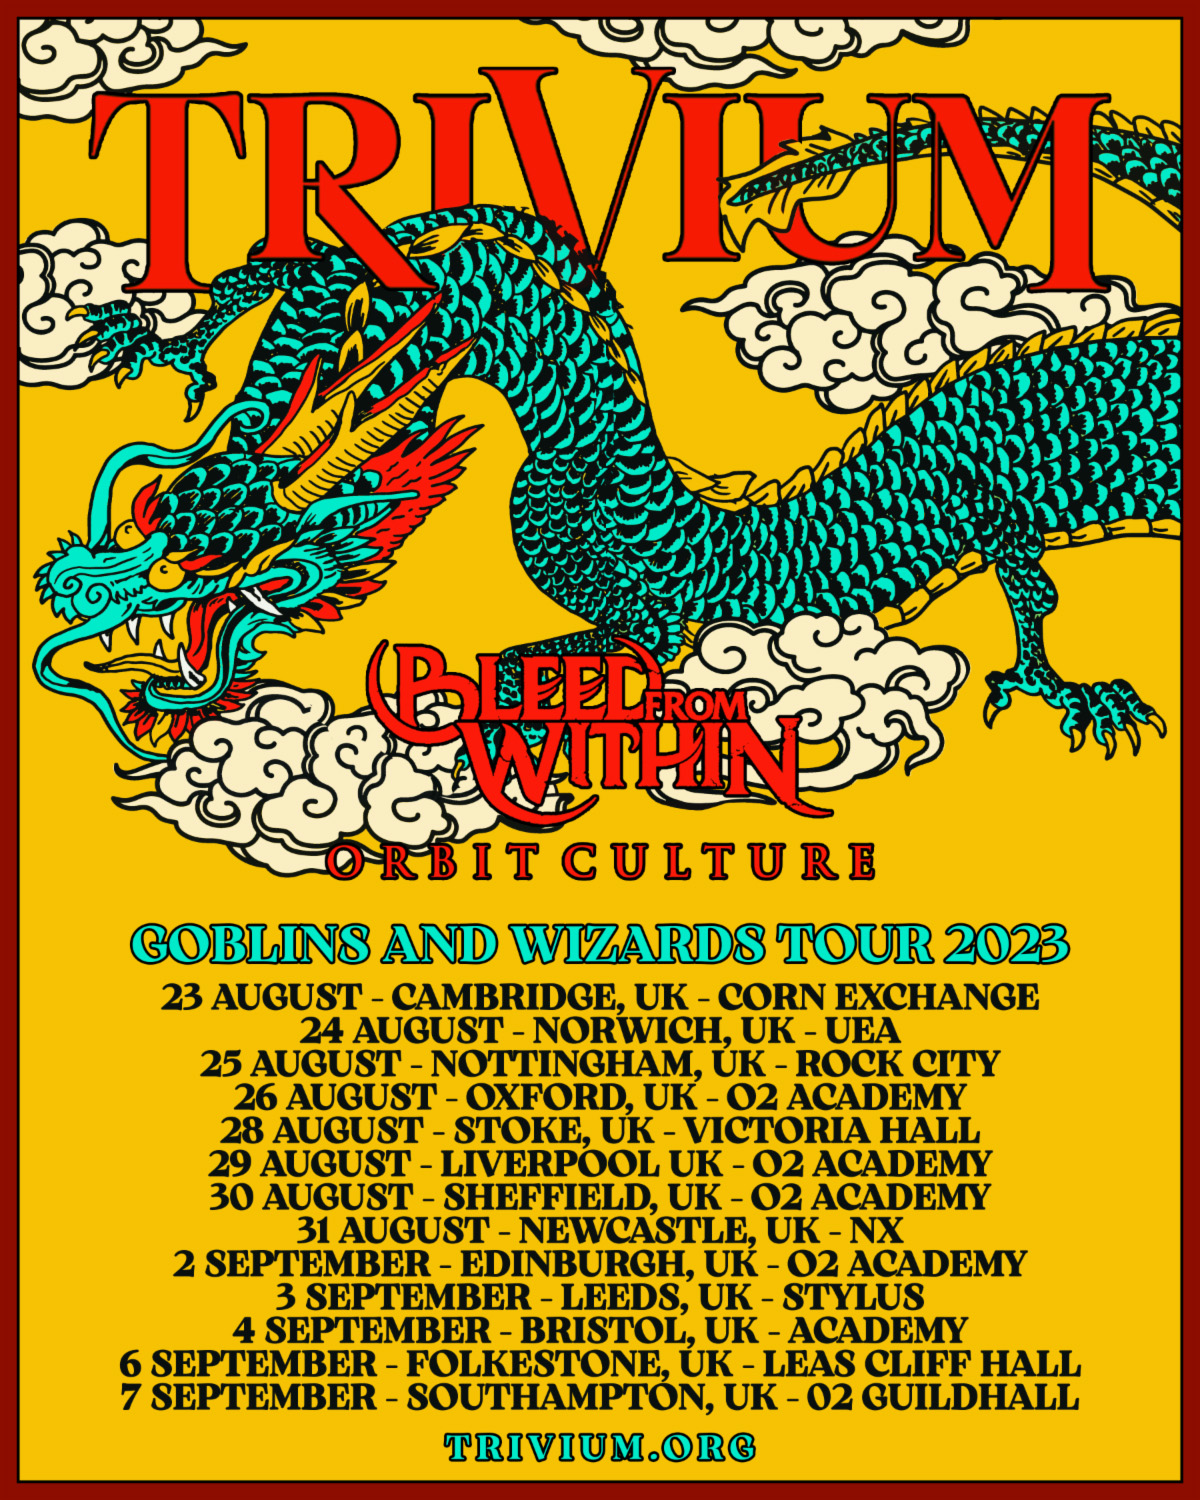 Trivium Announce ‘Goblins and Wizards’ Intimate Summer UK Tour 2023

Artwork for Trivium’s ‘Goblins and Wizards’	UK Tour